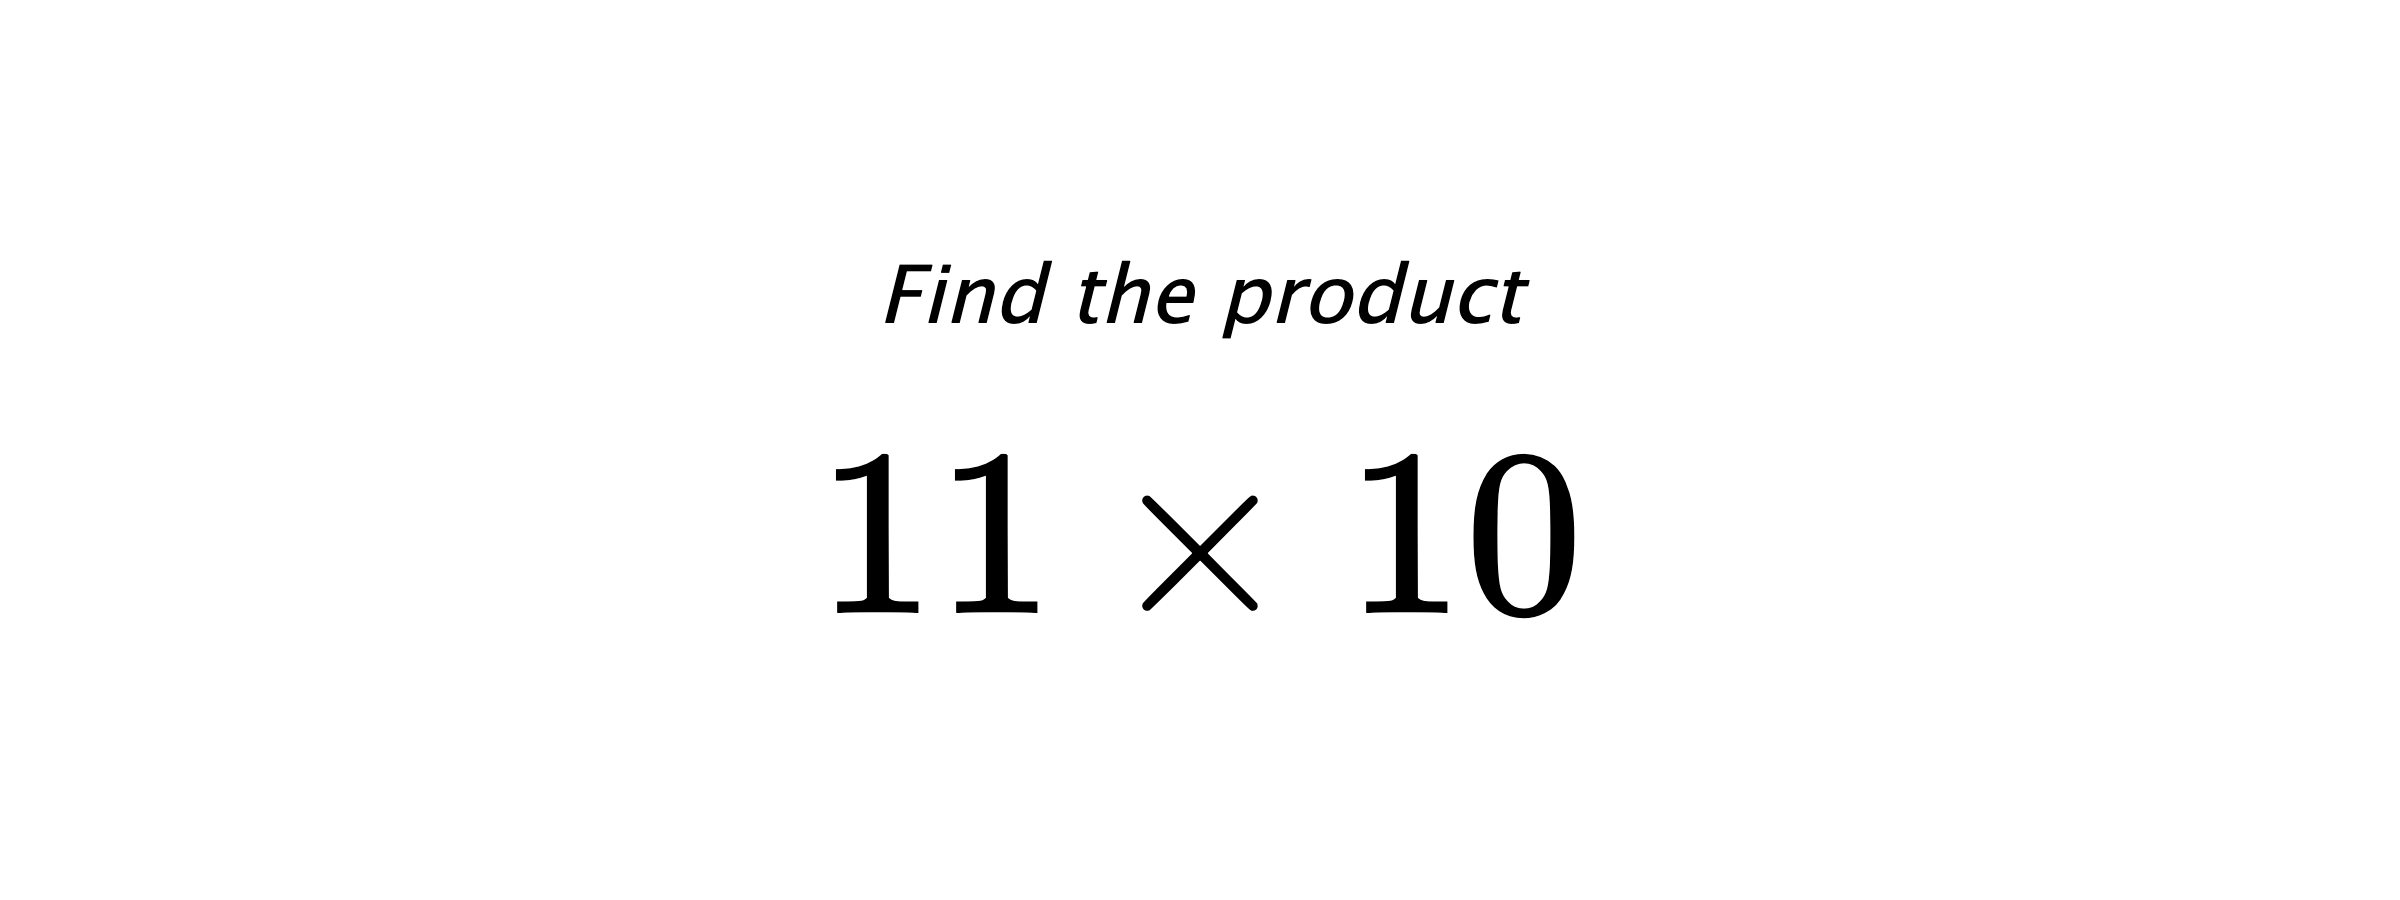 Find the product $ 11 \times 10 $